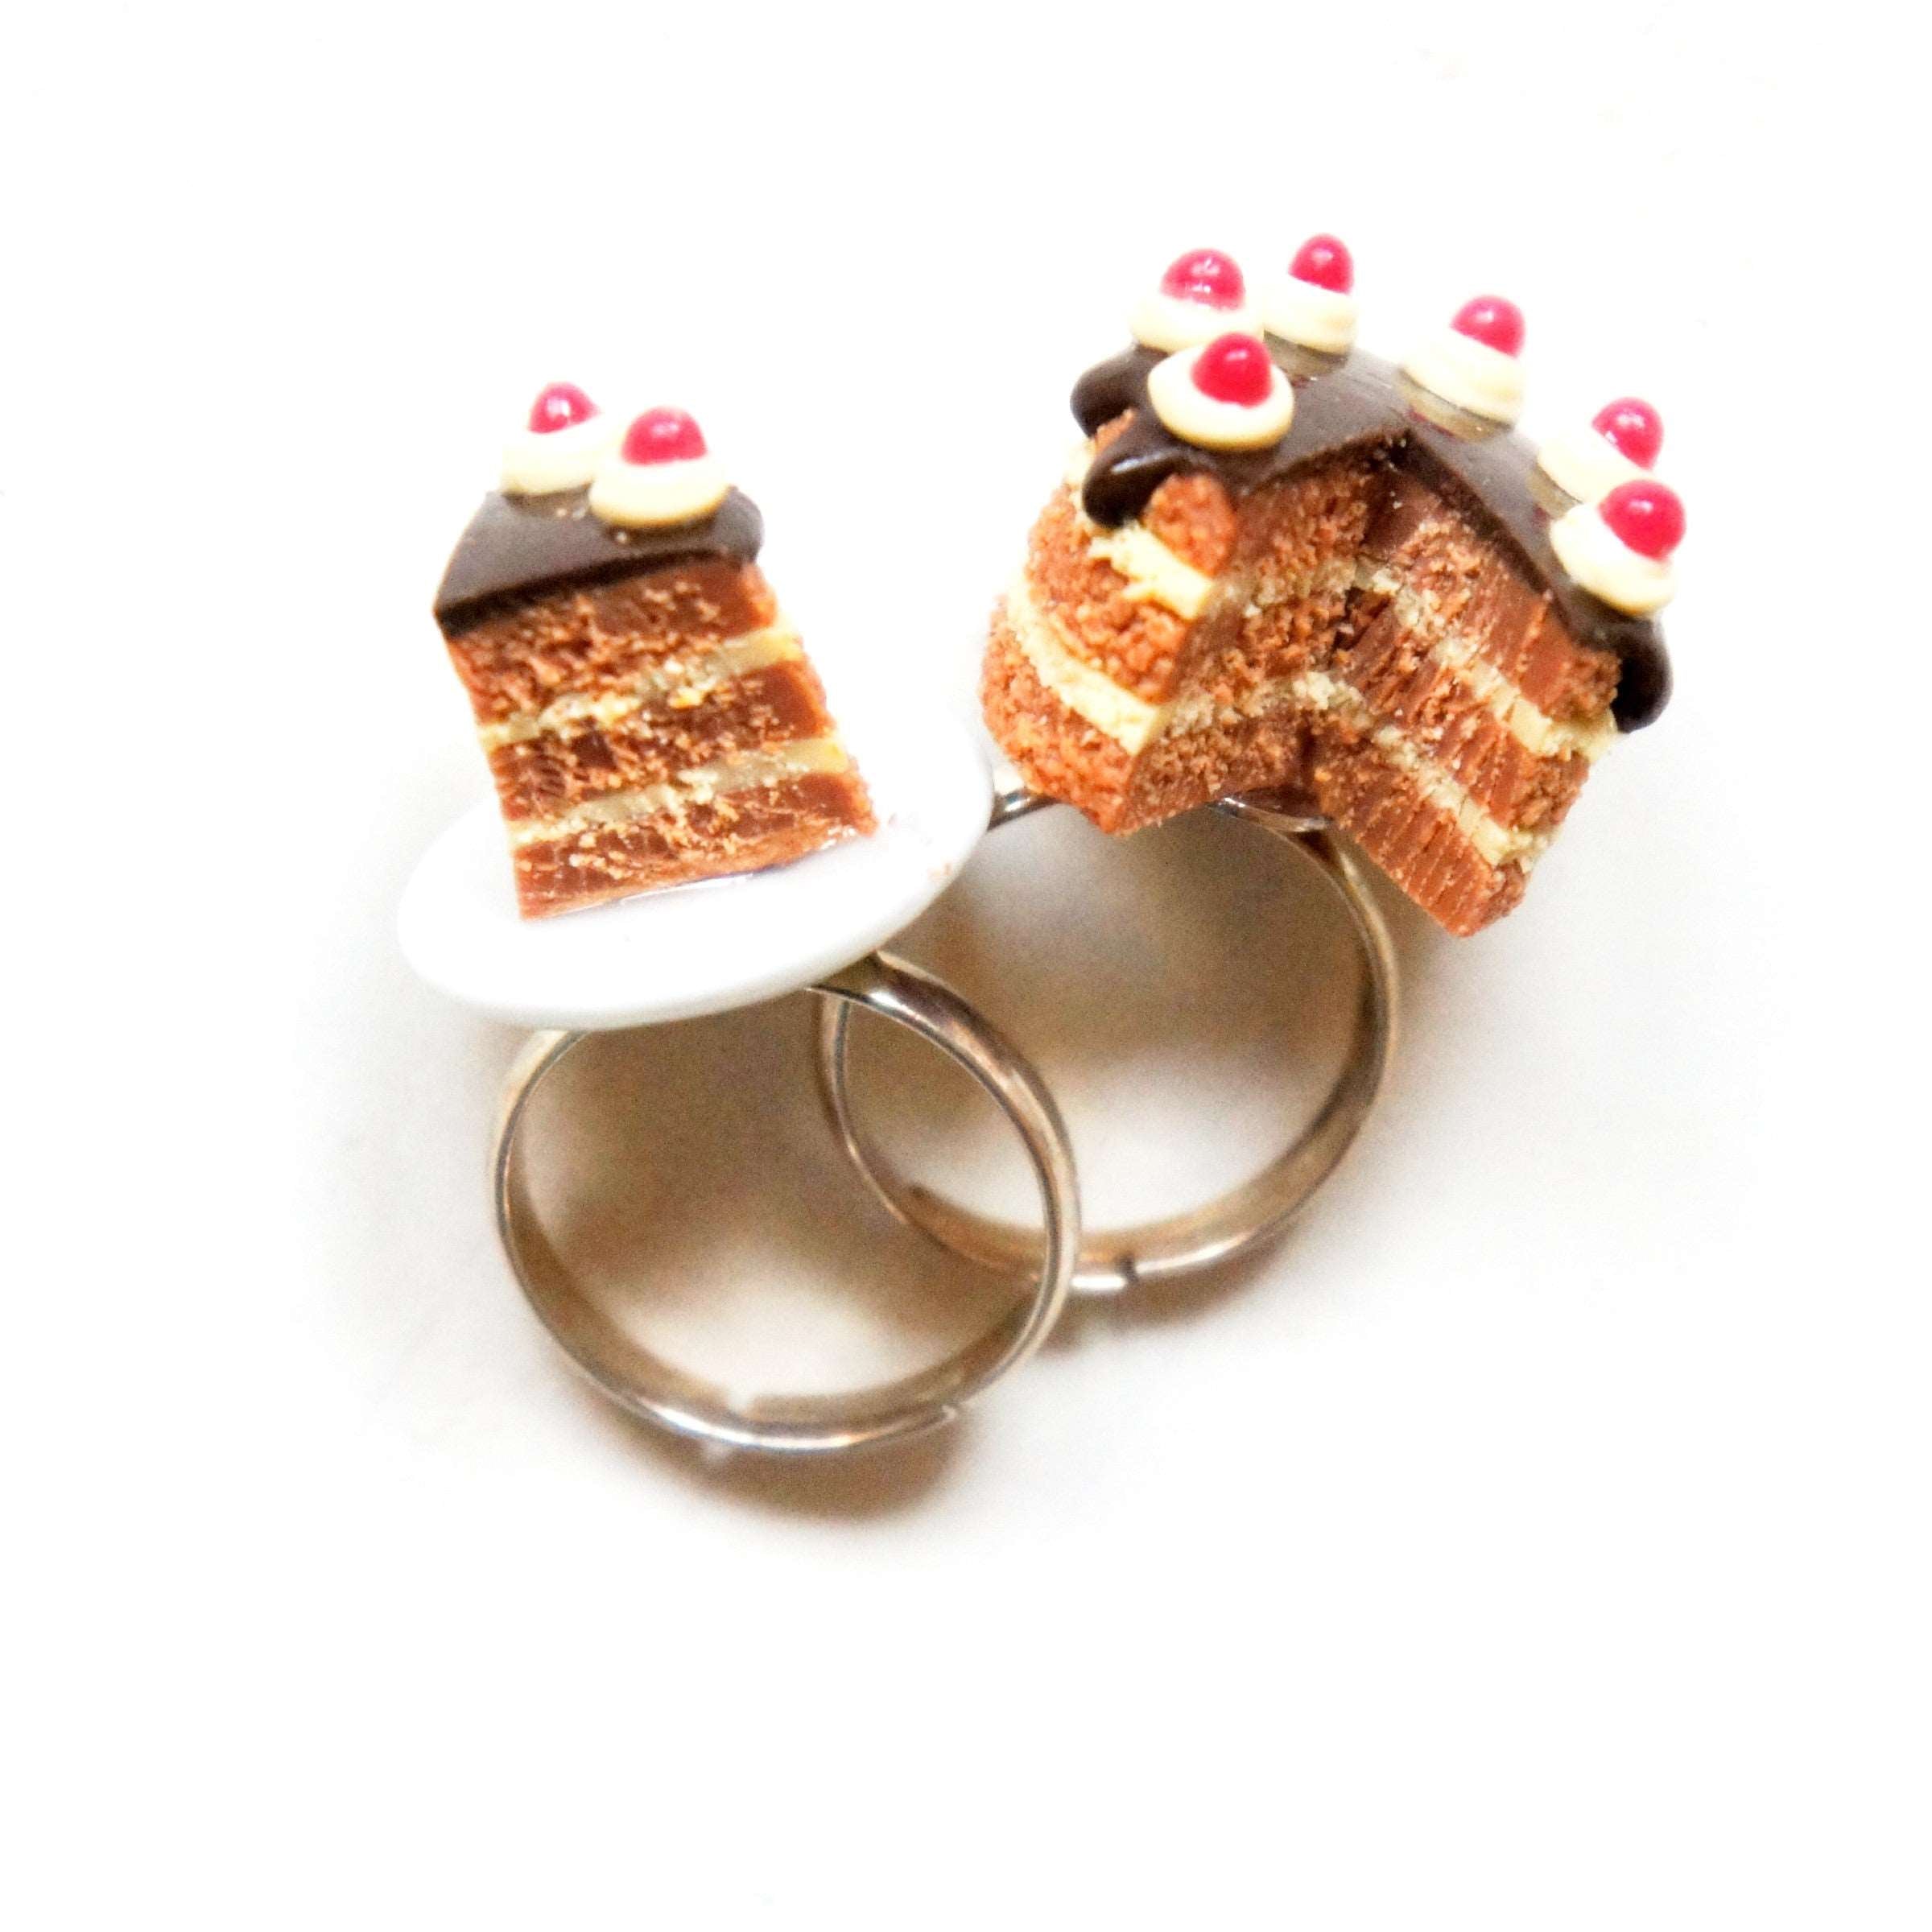 Black Forest Cake Friendship Ring Set - Jillicious charms and accessories